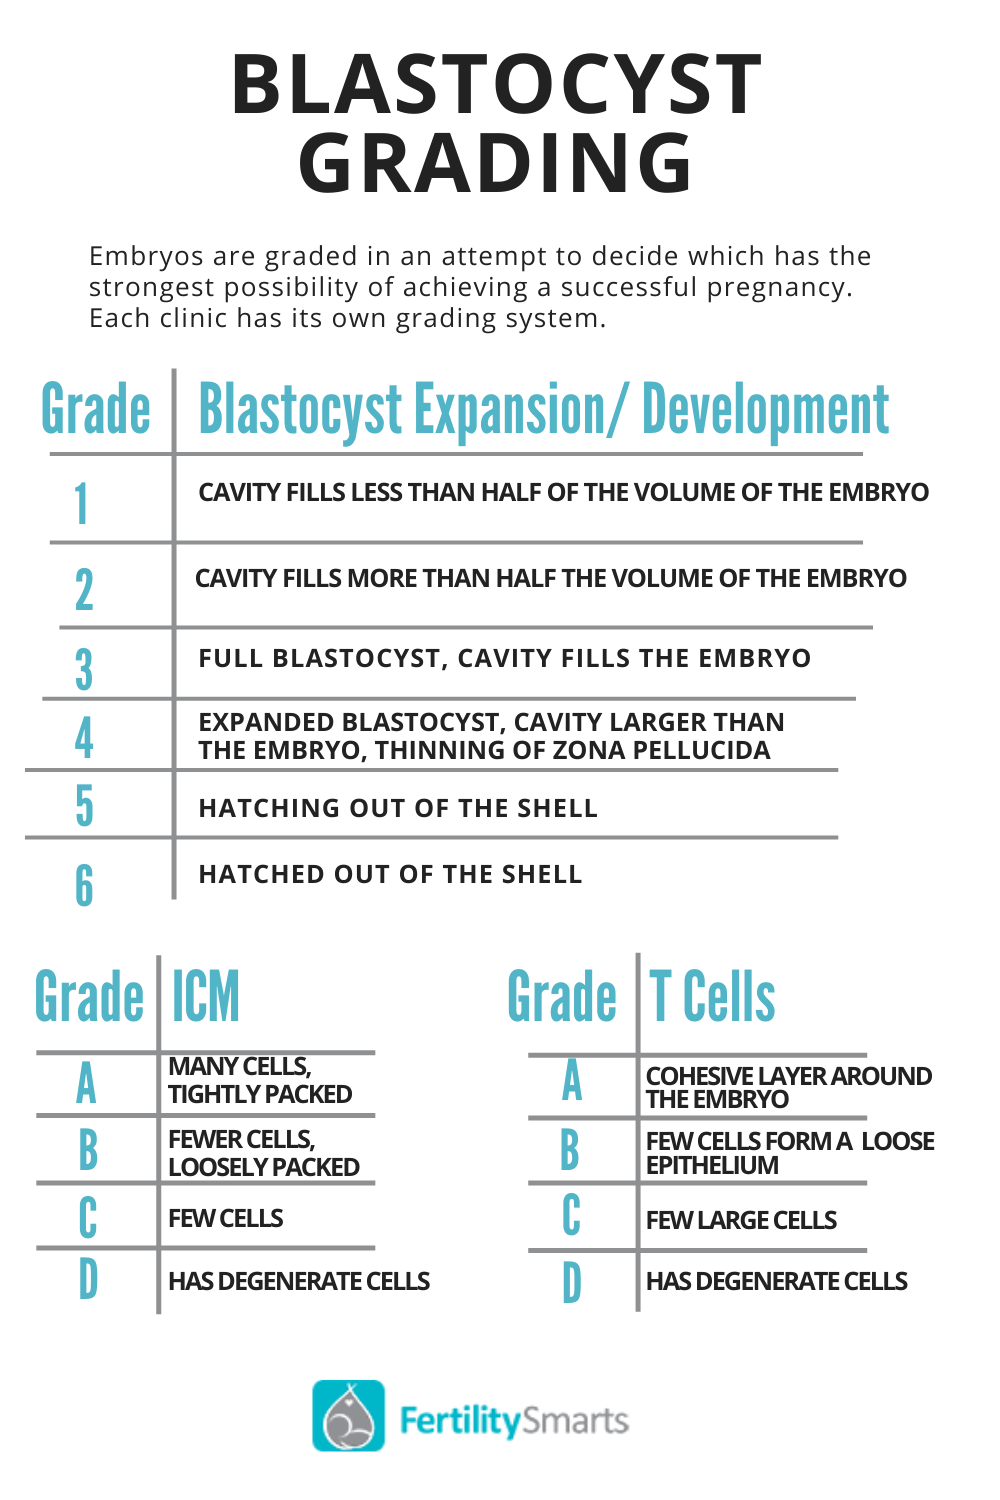 The elements used to grade a blastocyst in the IVF lab.